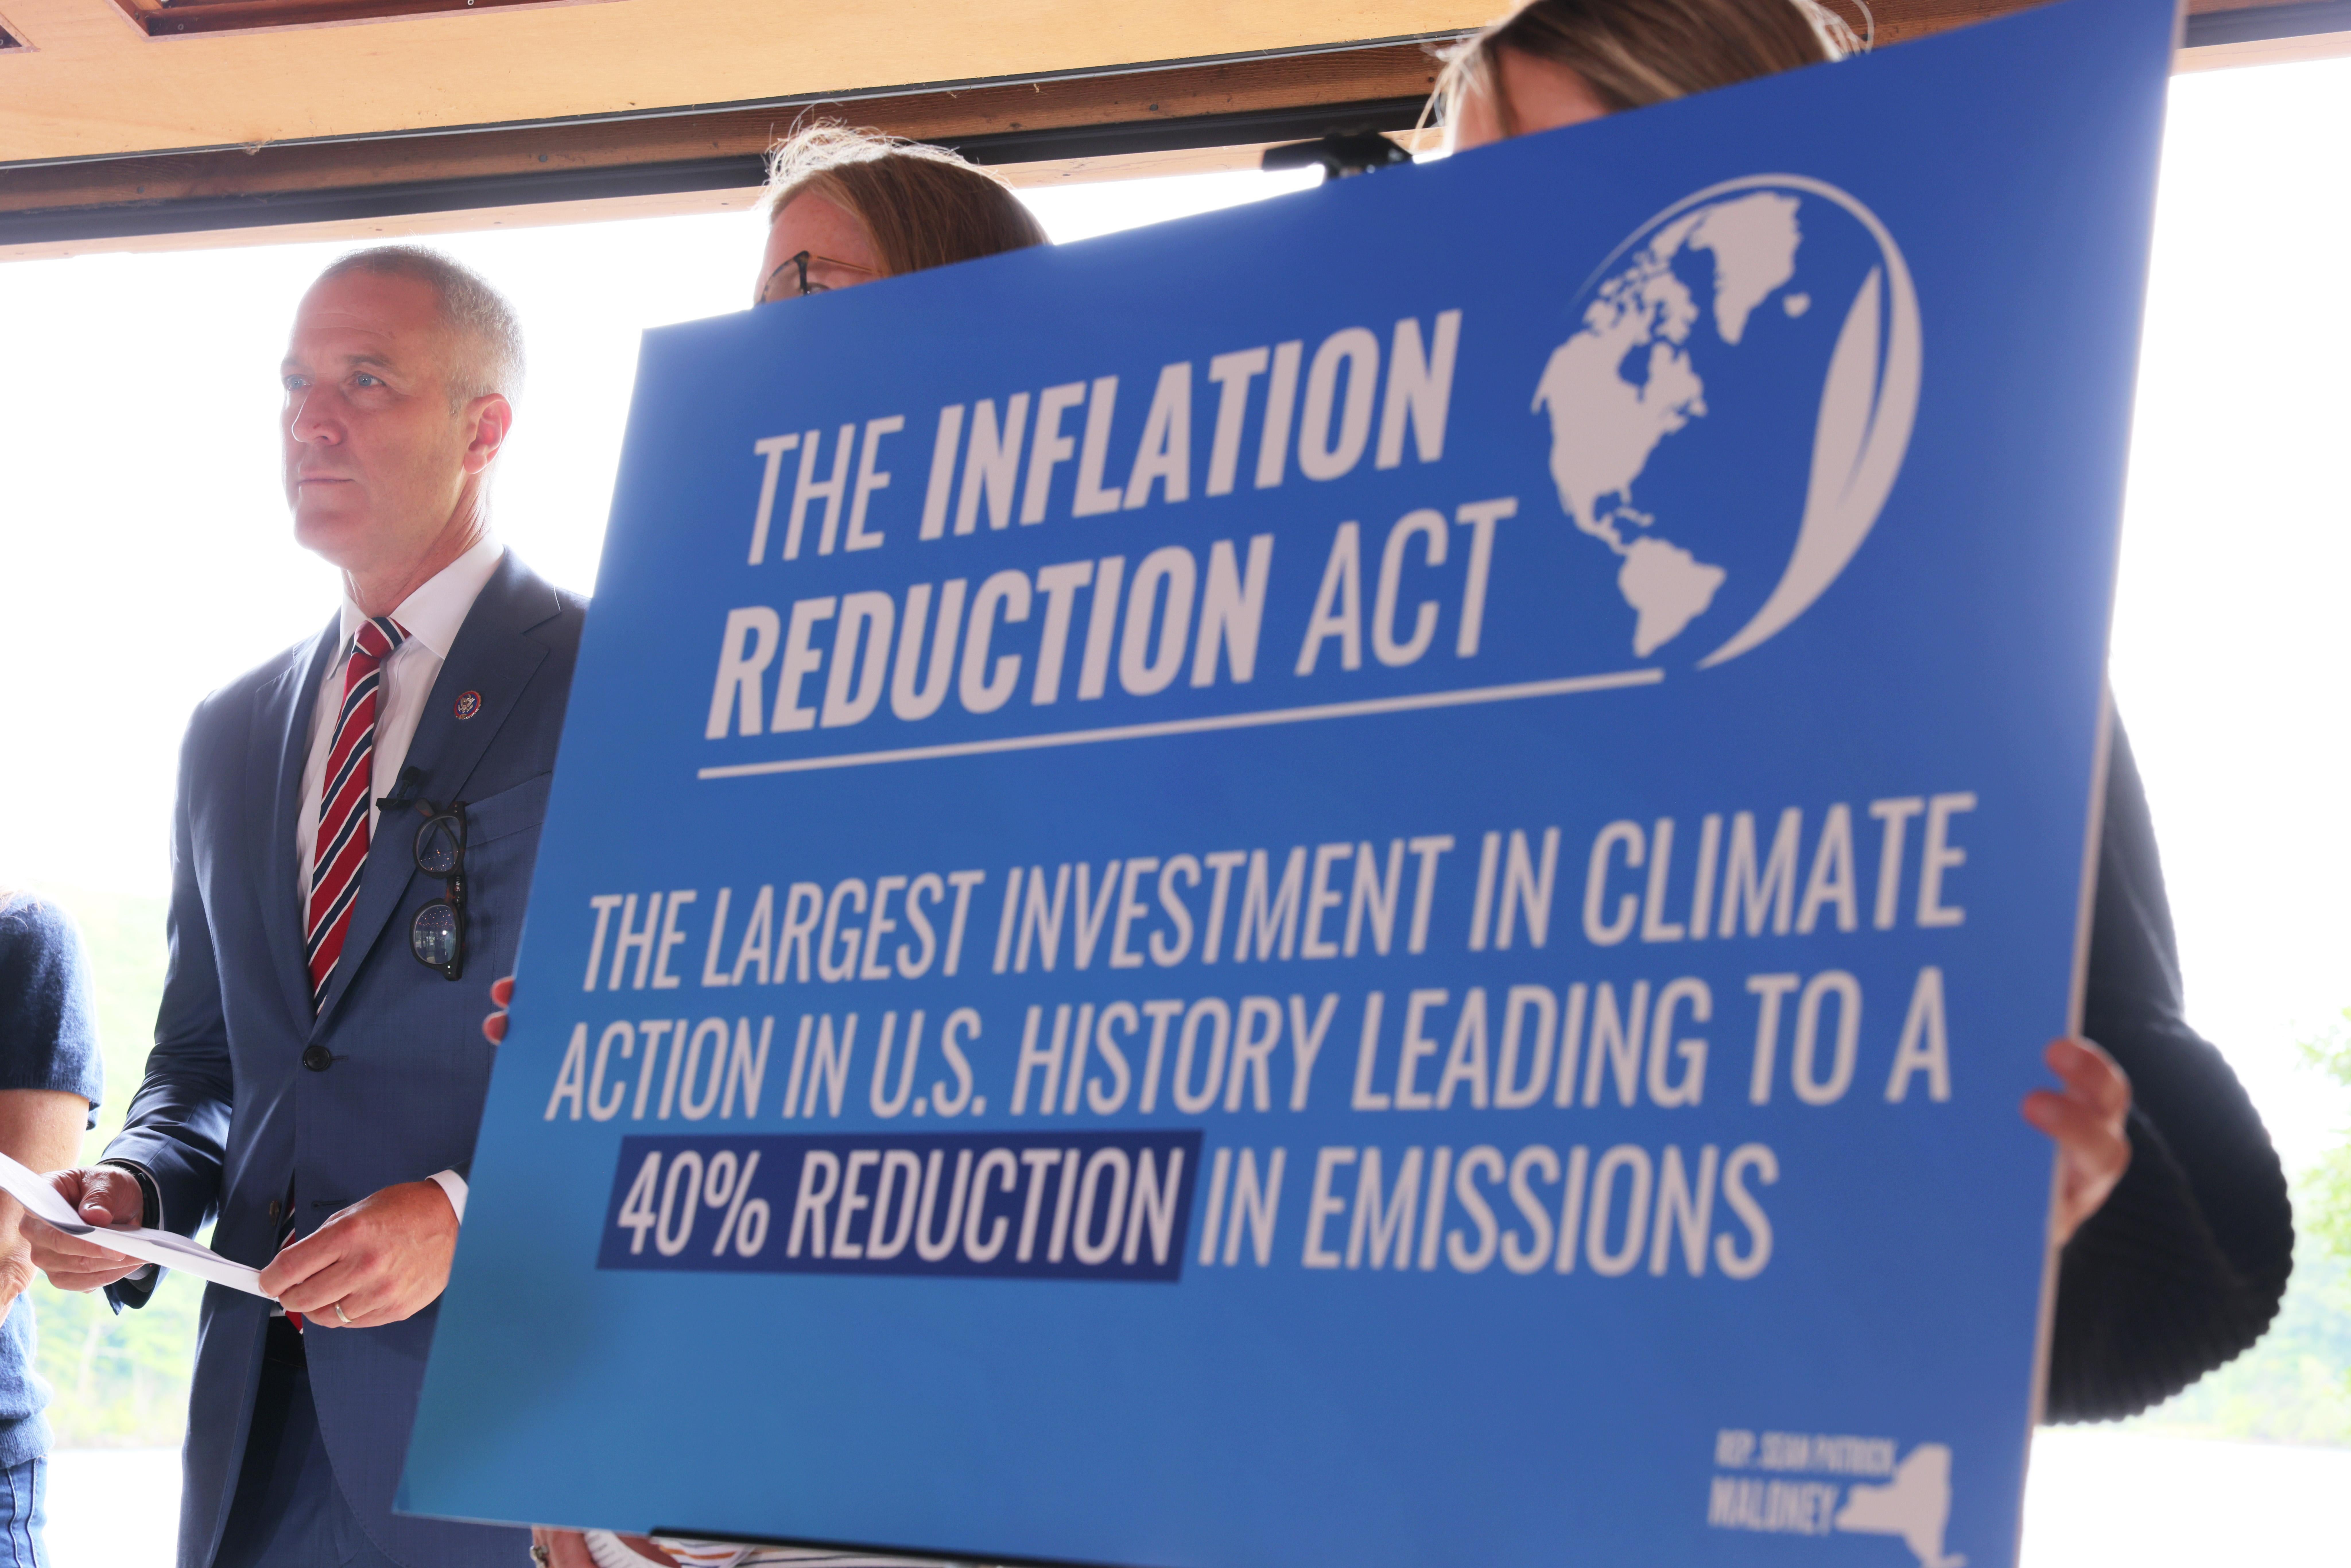 Rep. Sean Patrick Maloney stands in a suit behind a blue sign that says "The Inflation Reduction Act: the largest investment in climate action in U.S. history leading to a 40 percent reduction in emissions."